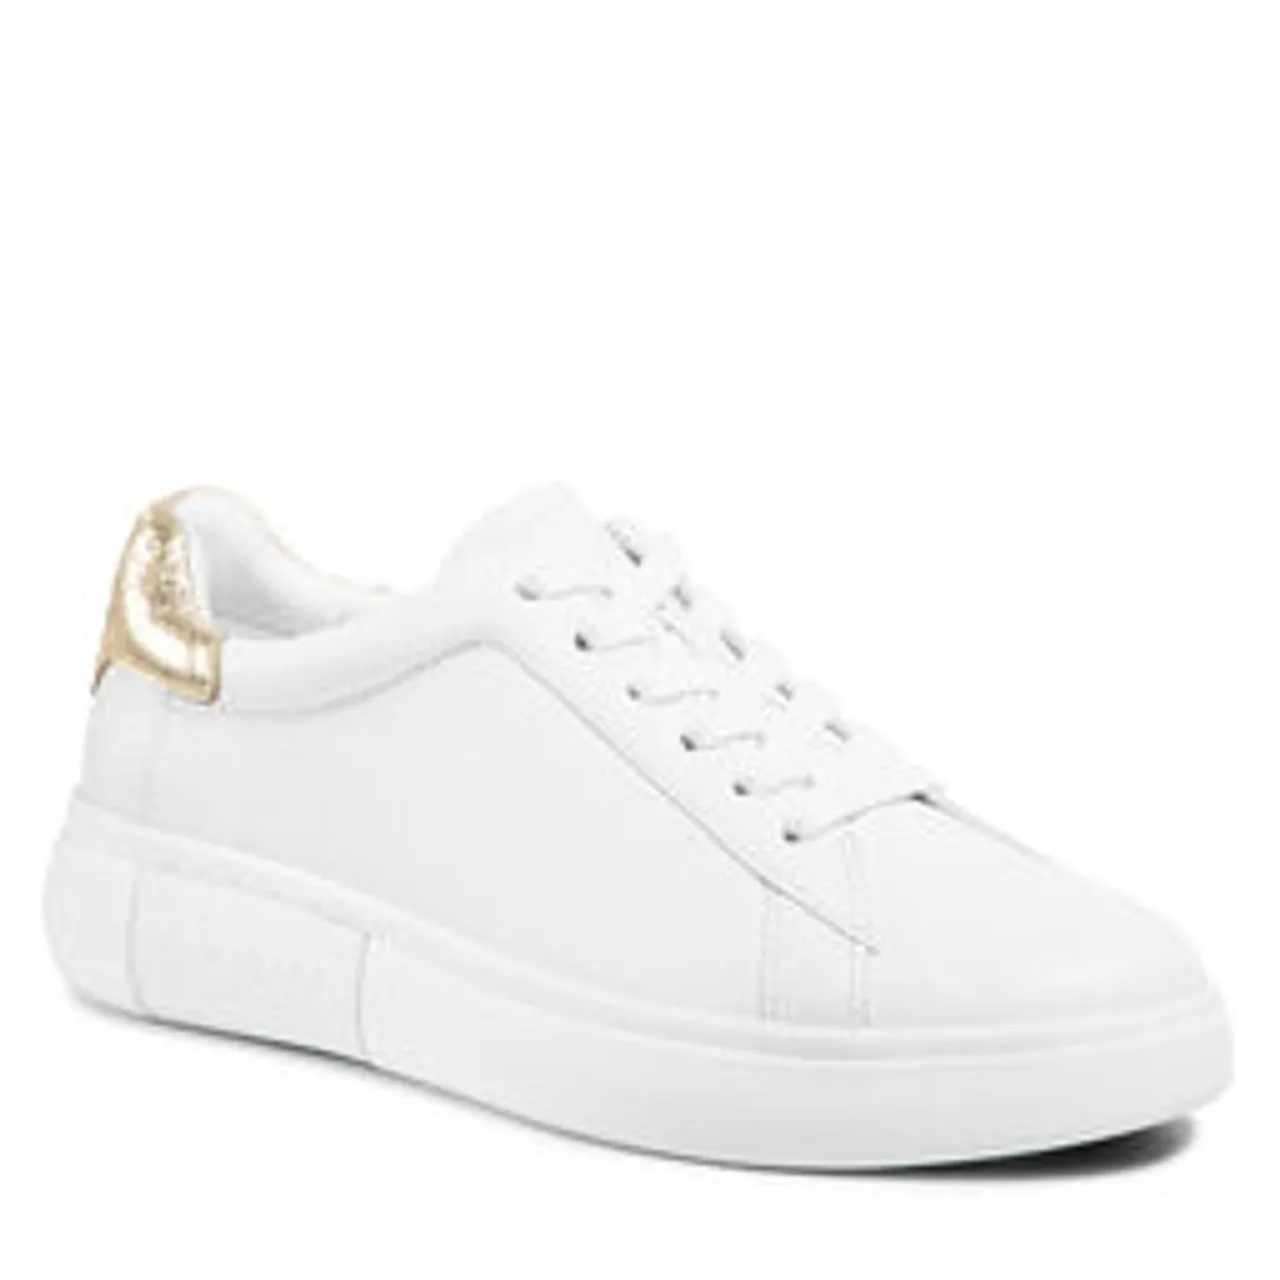 Sneakers Kate Spade Lift K0023 Optic White/Pale Gold Qpt